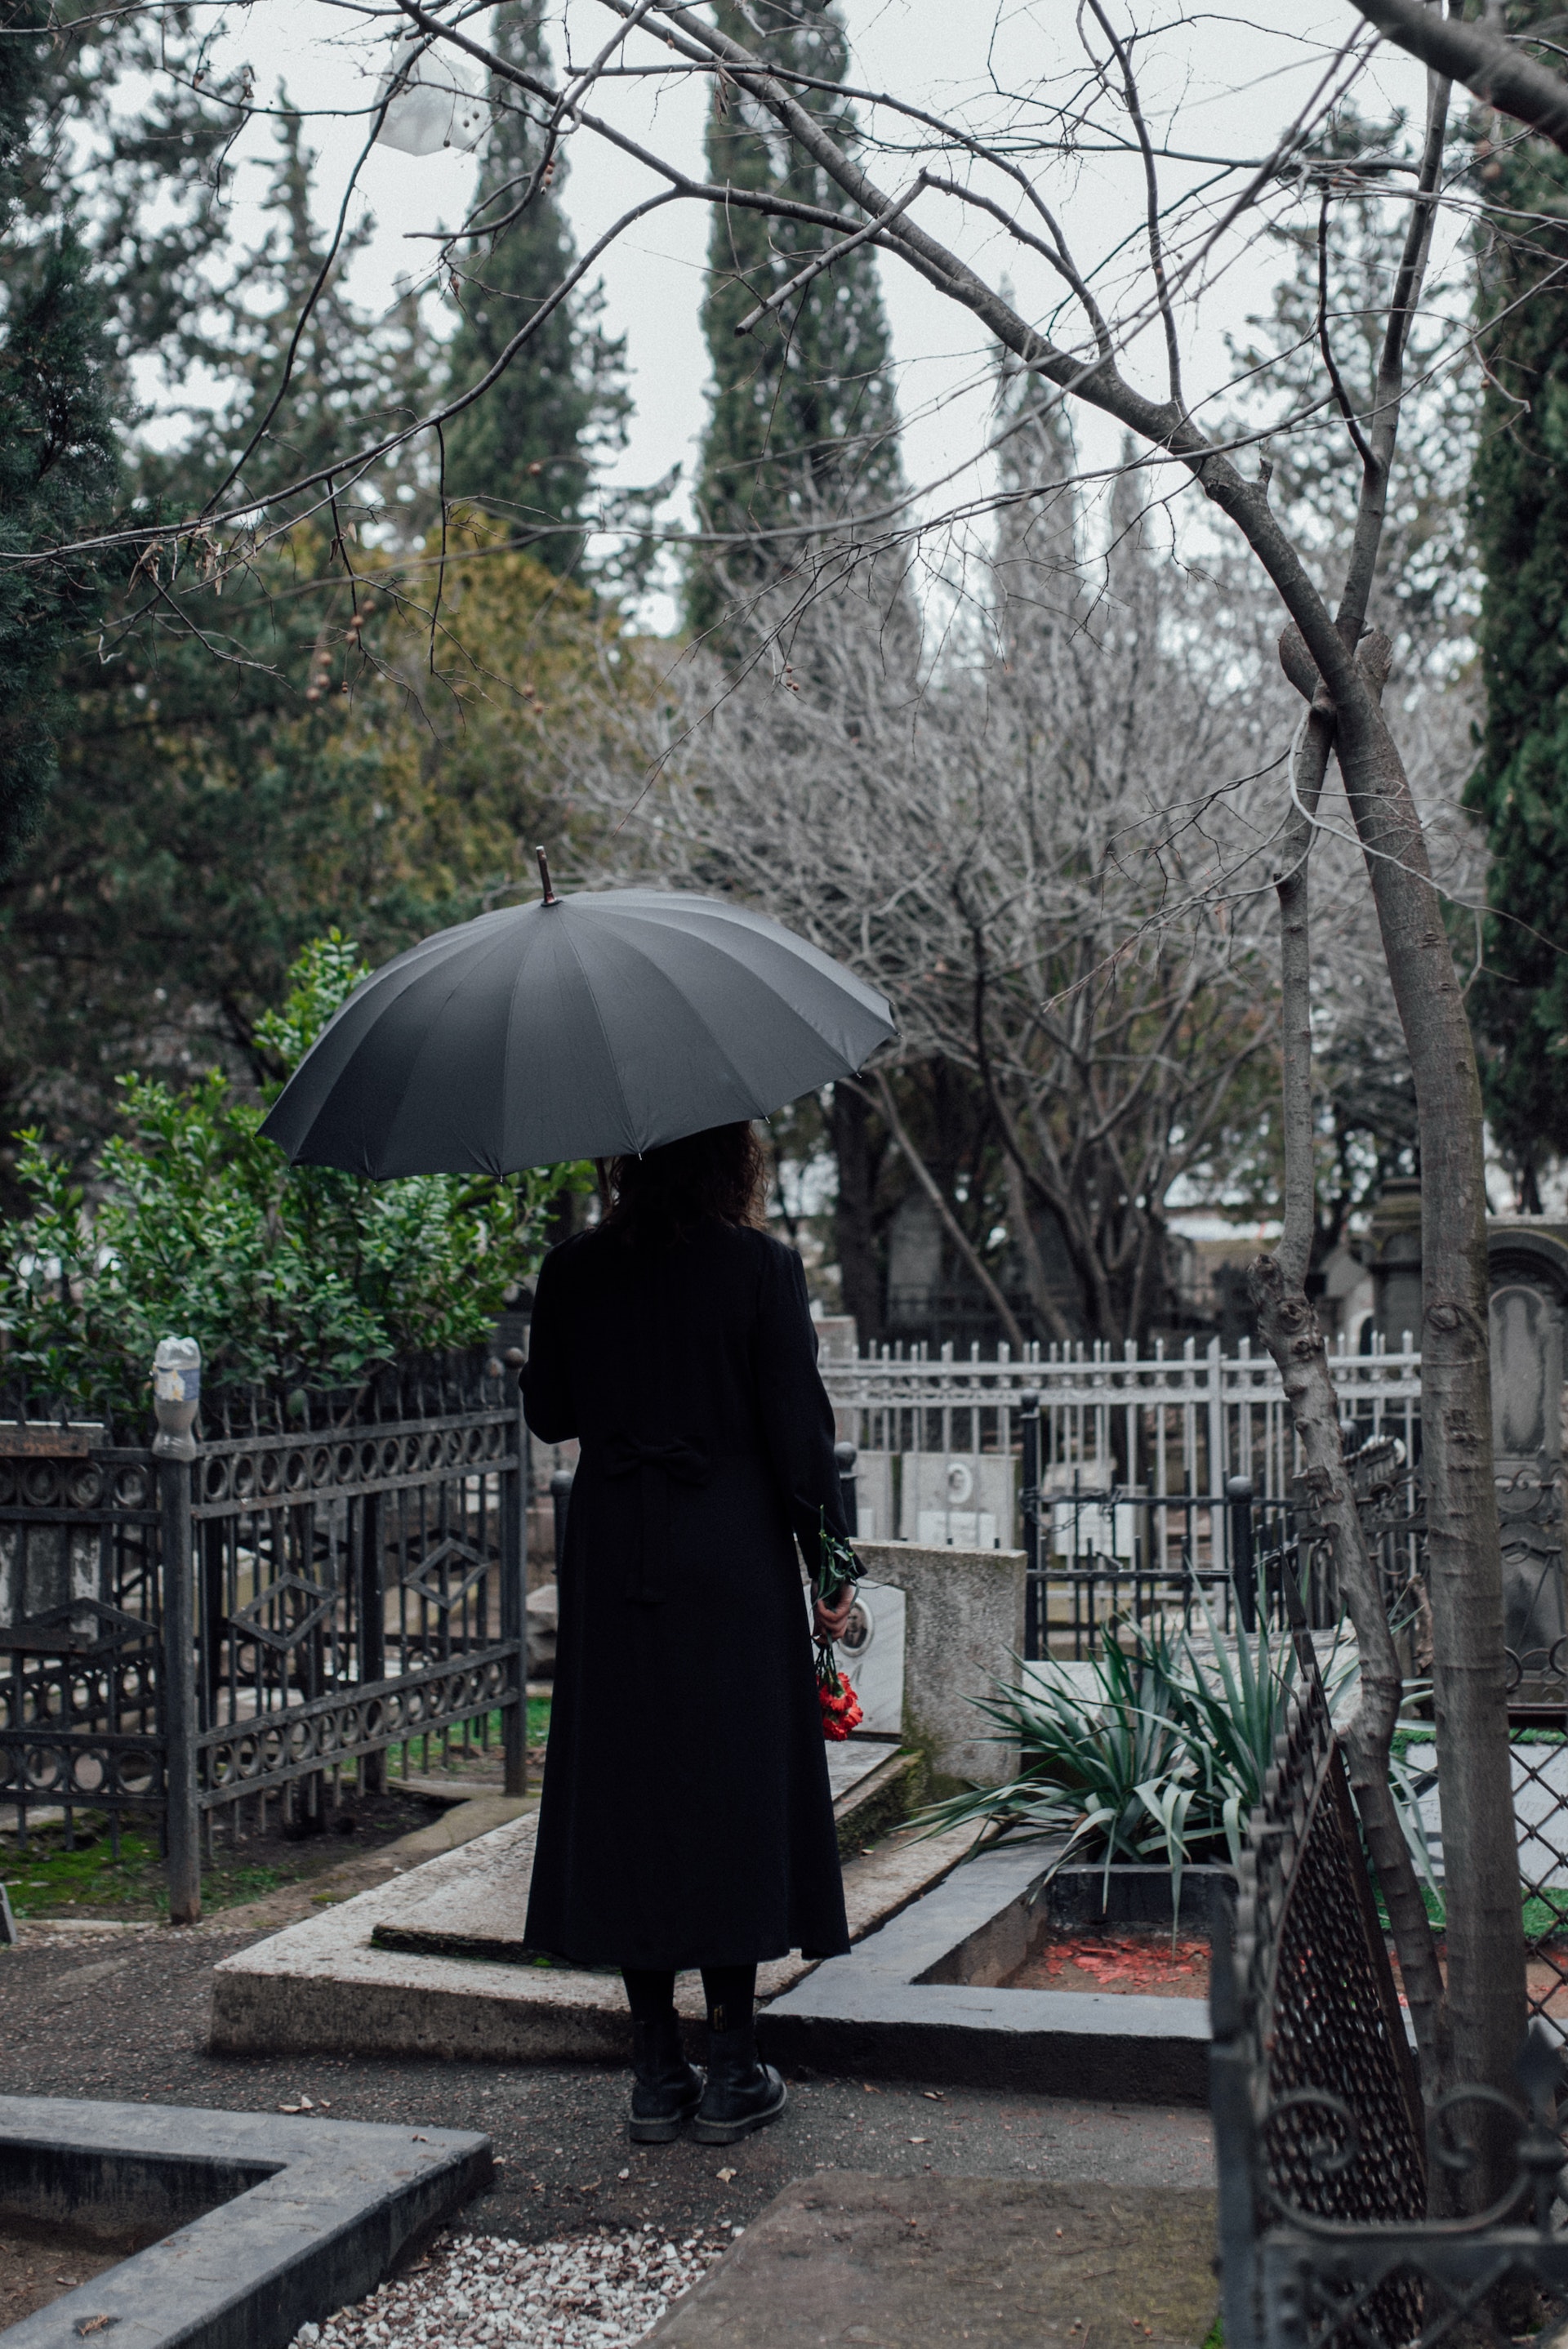 A woman holding an umbrella at the cemetery | Source: Pexels